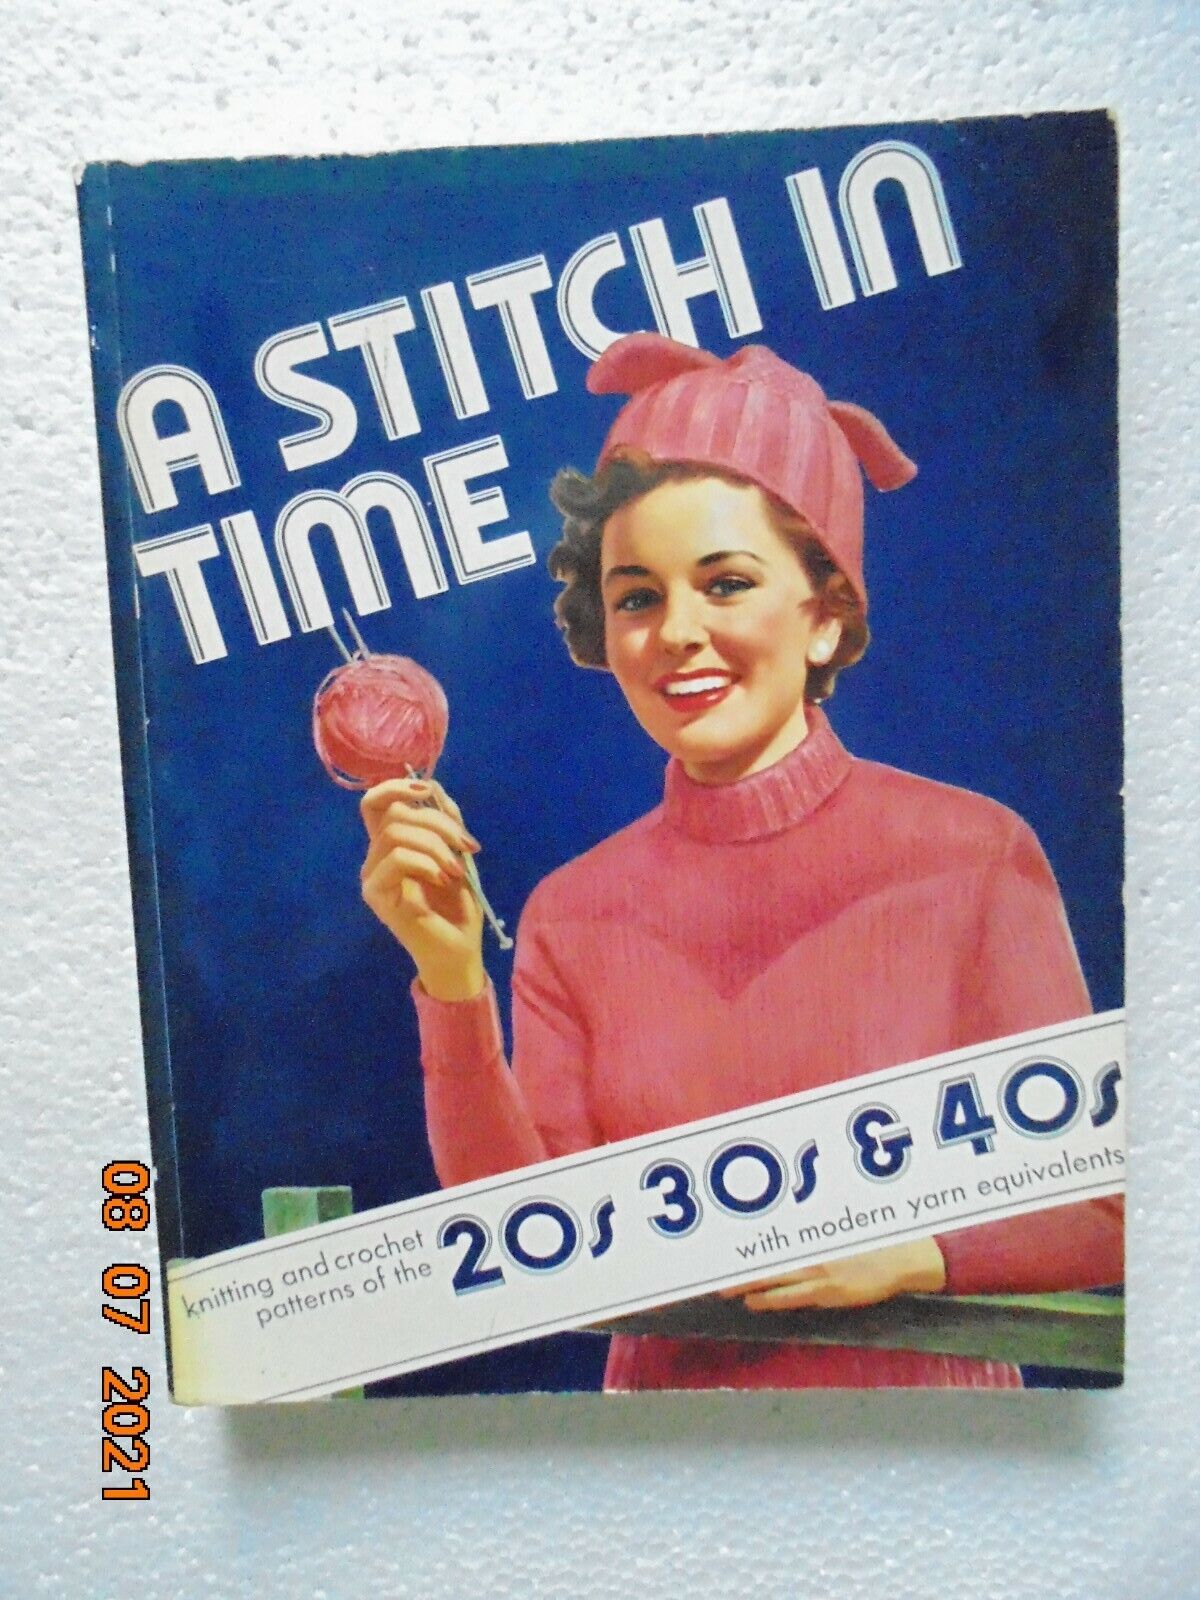 A Stitch in Time book Knitting and crochet patterns from 20s 30s & 40s Tania, de nieuwste baan